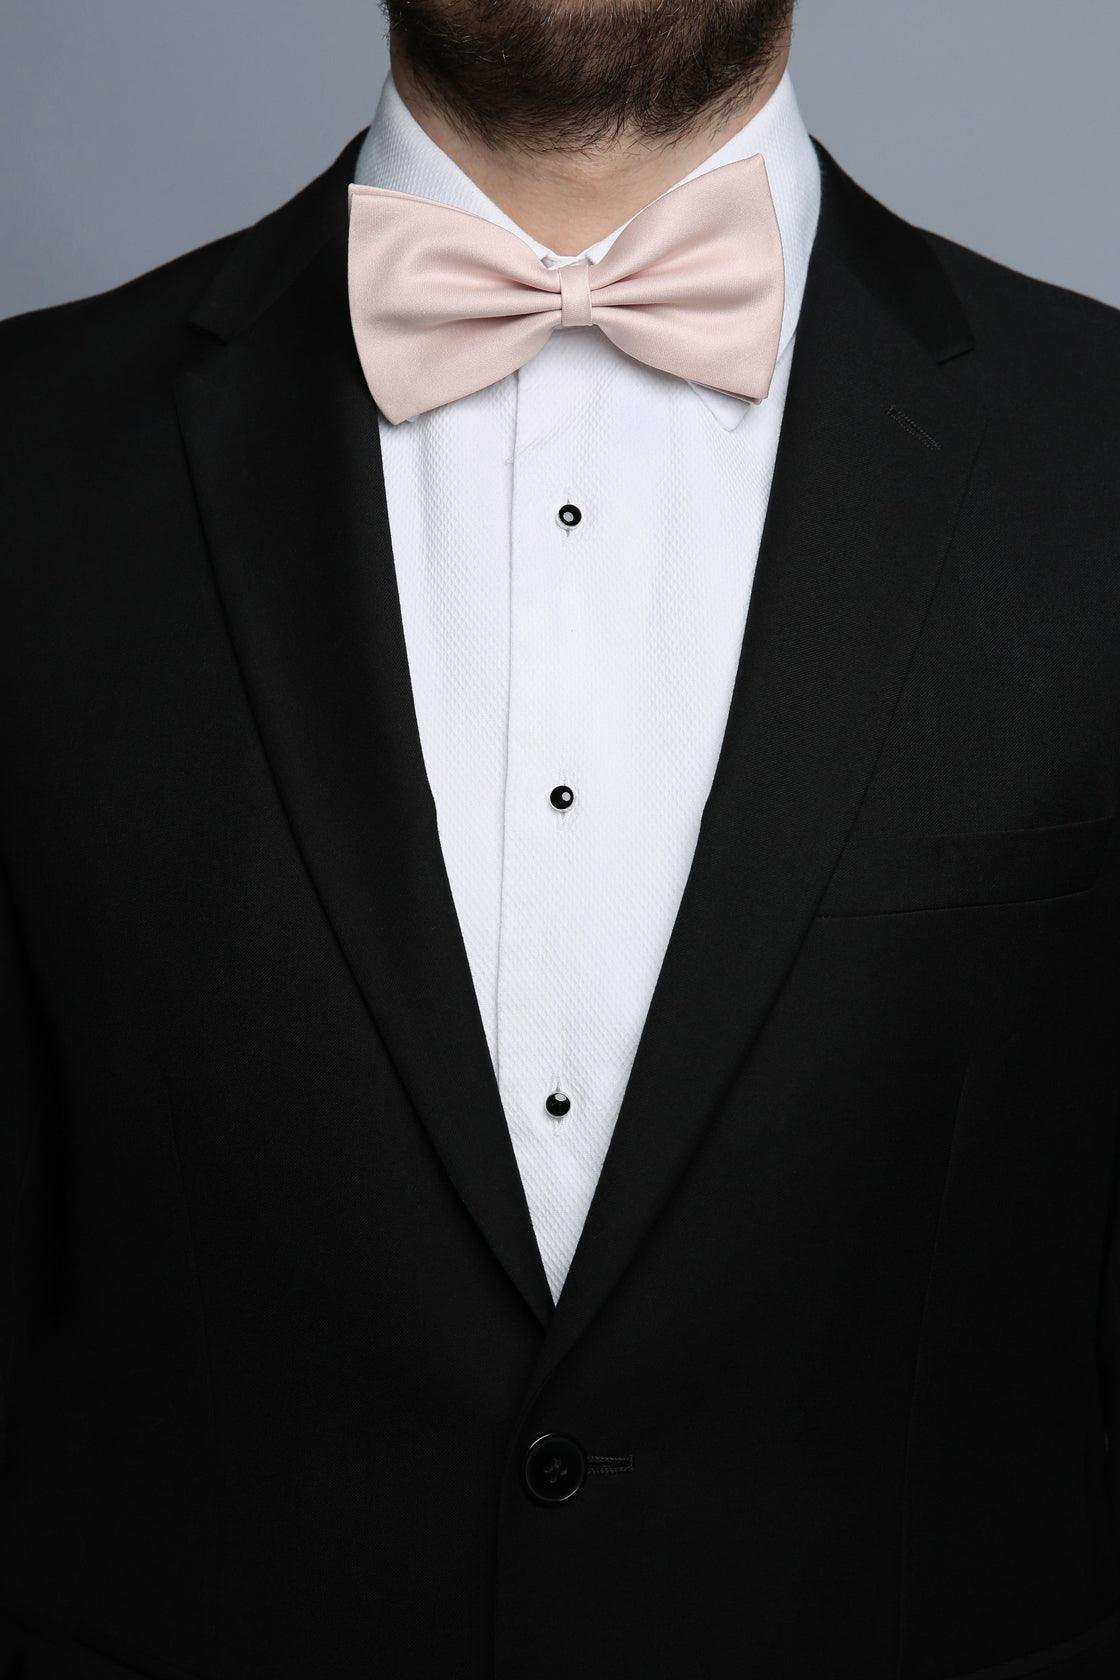 BOW TIE - WIDE - Adore Bridal and Occasion Wear